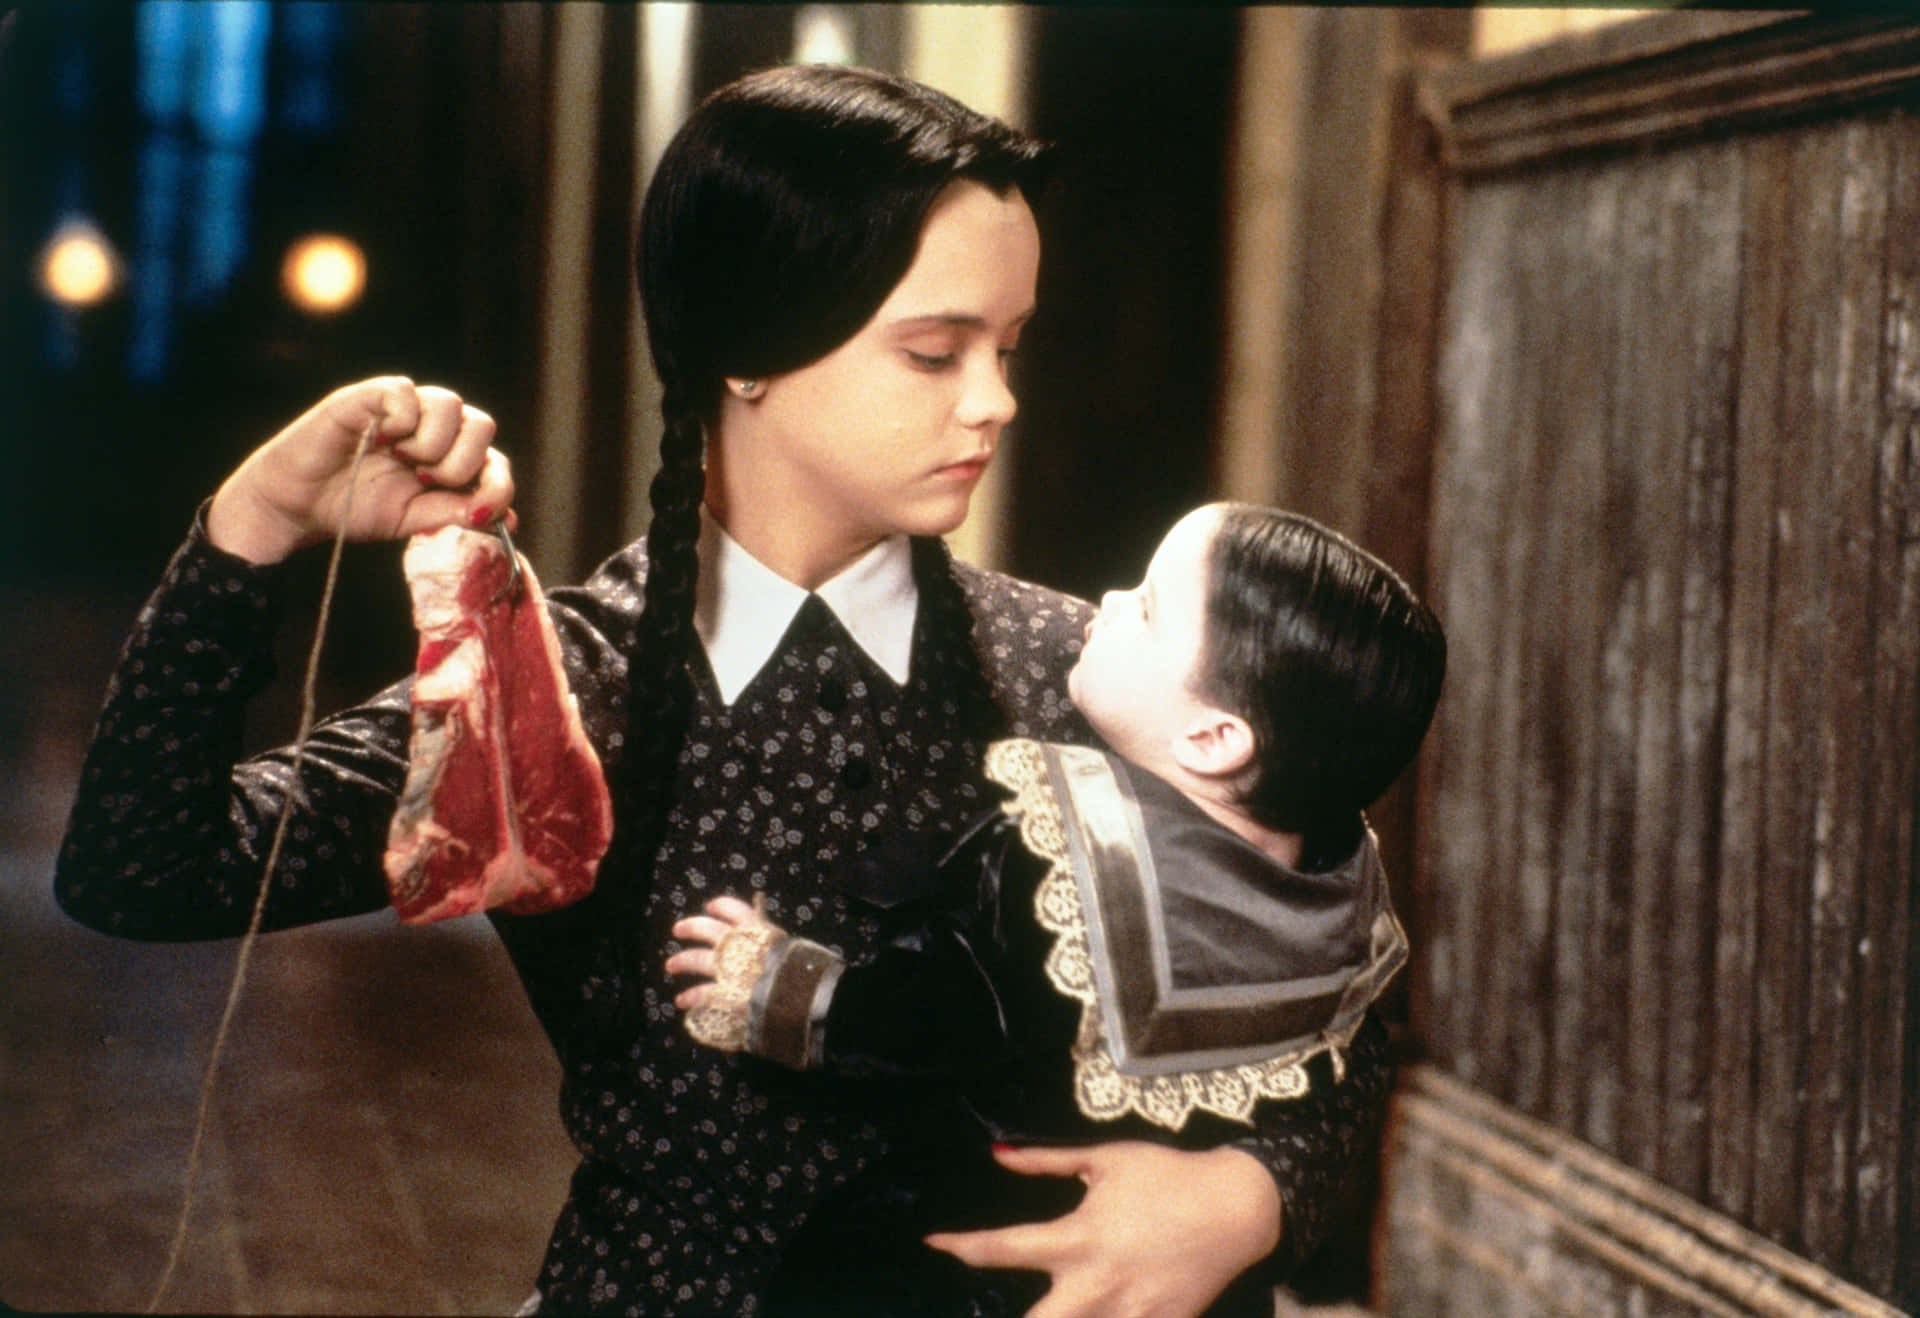 The Addams Family - Come Join the Weirdness